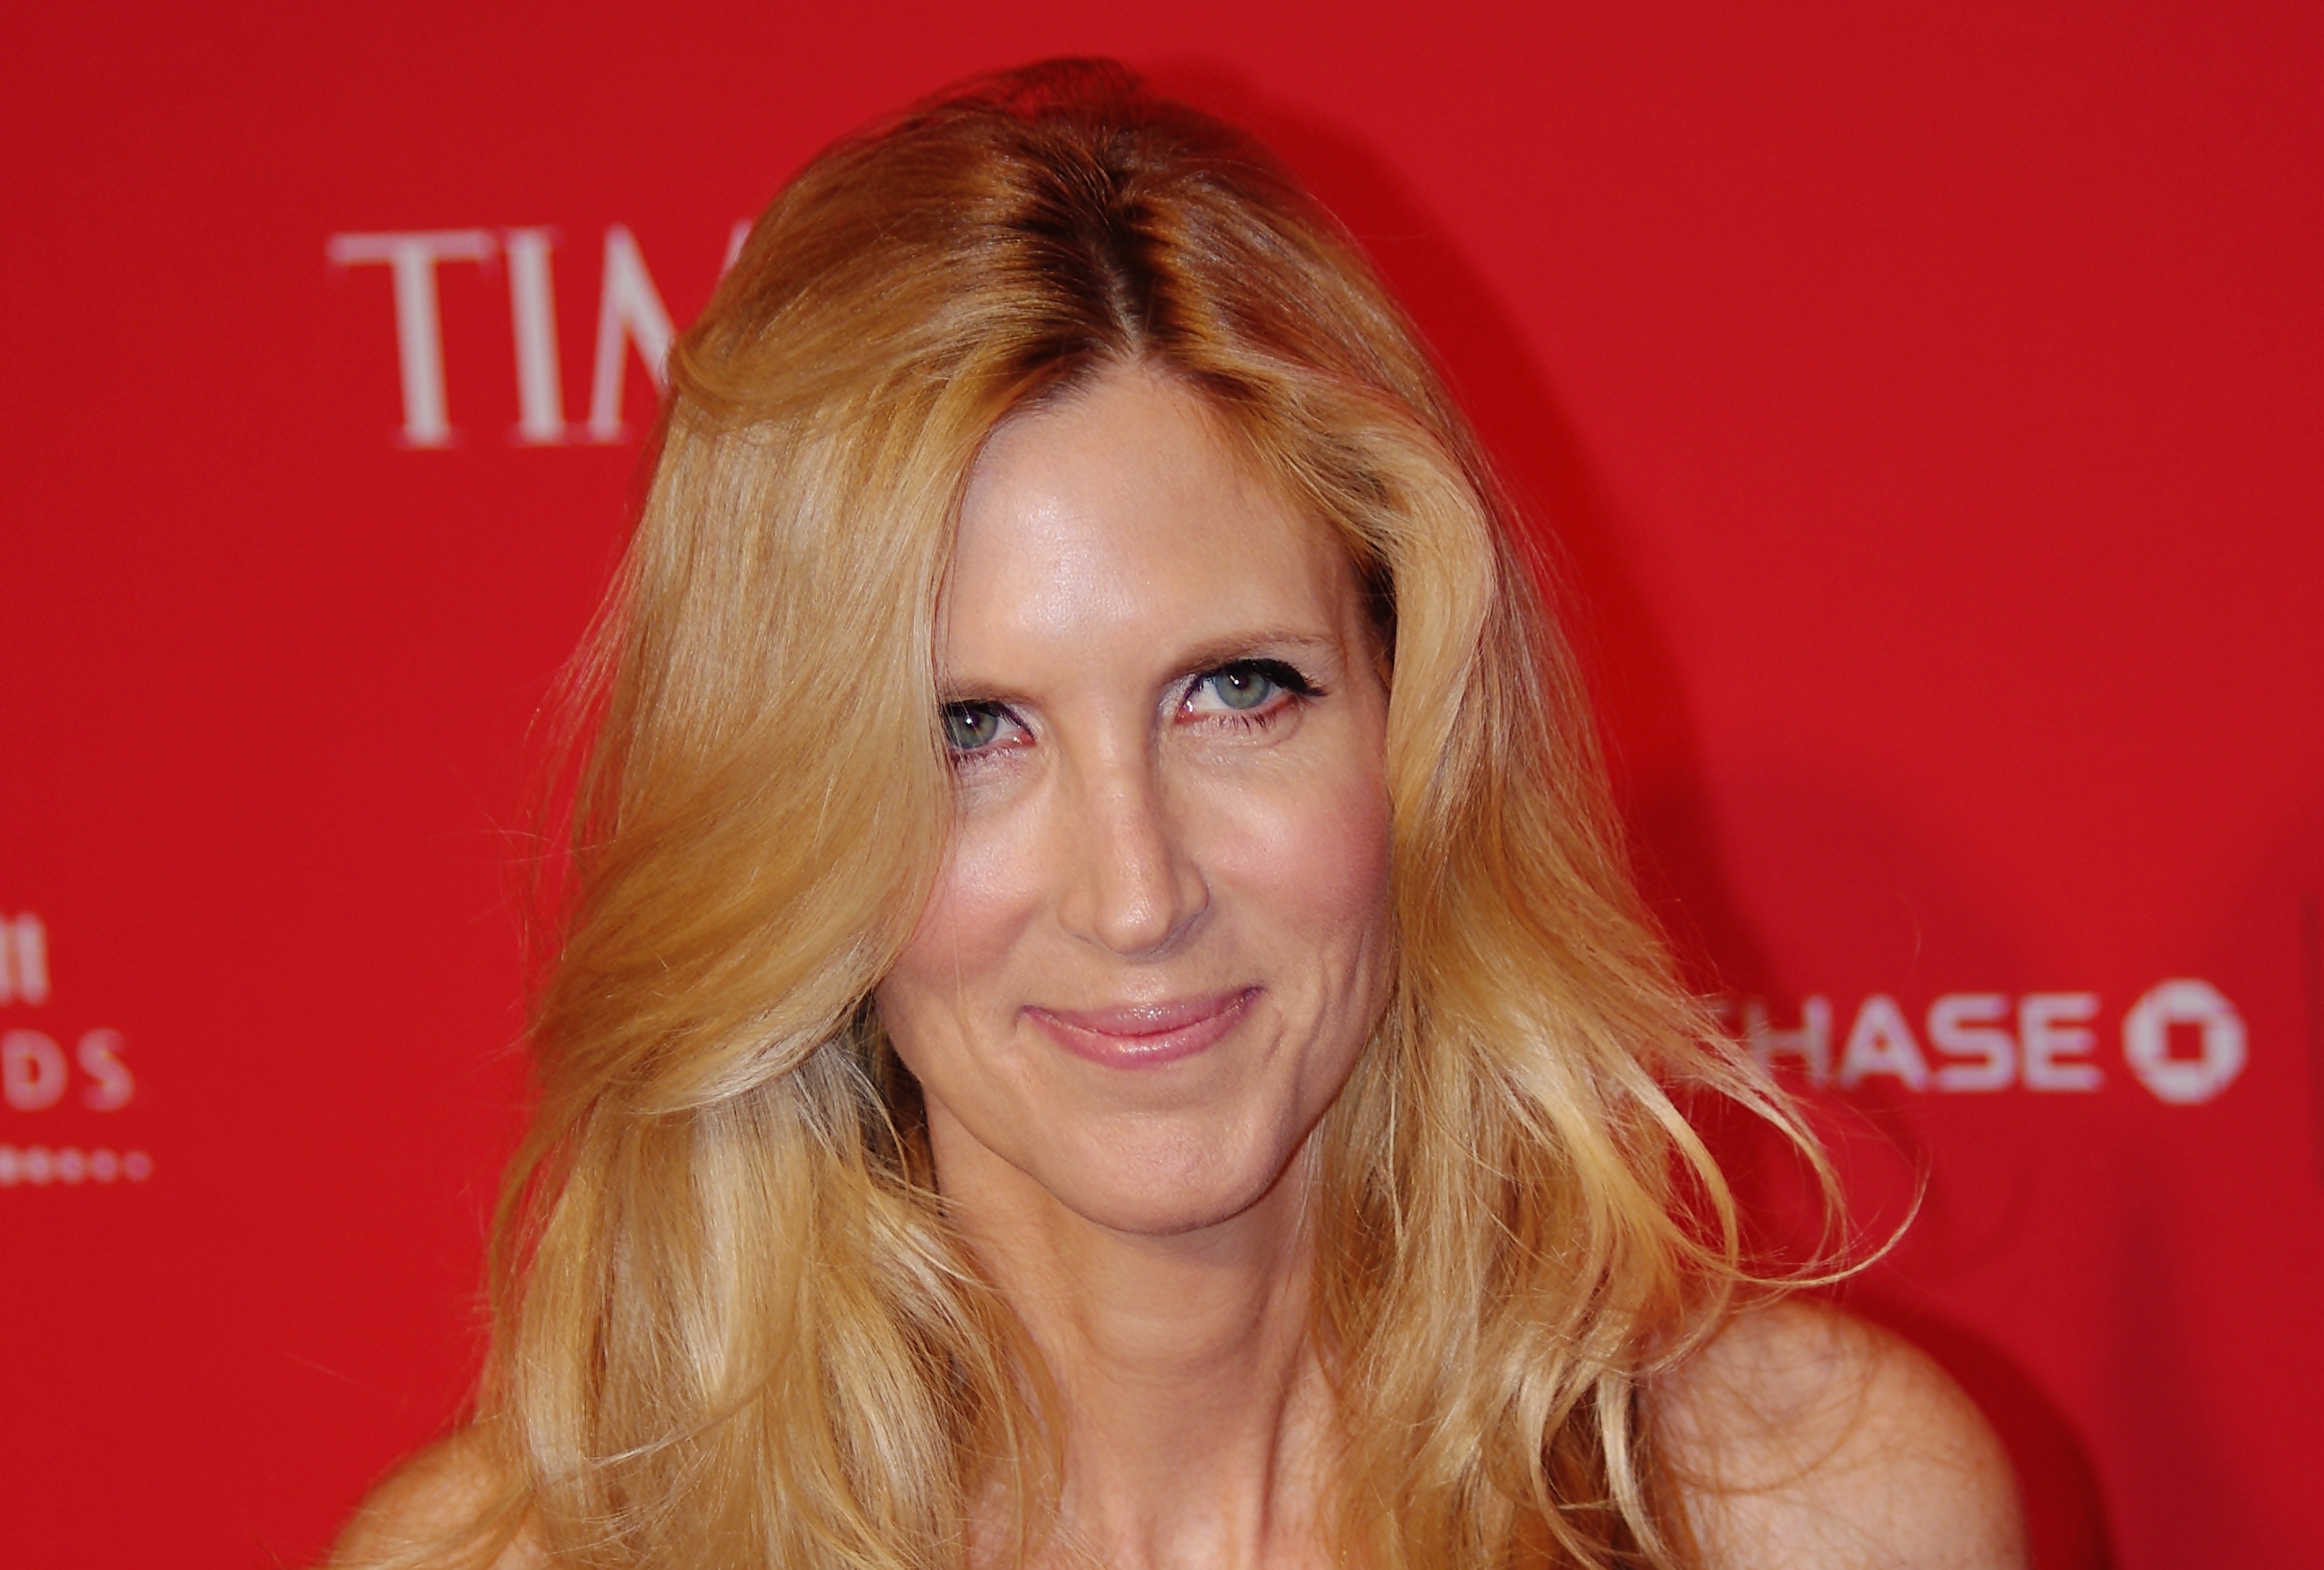 Coulter's Tweet on Immigration Fight Brings Holiday Traffic to Tribune